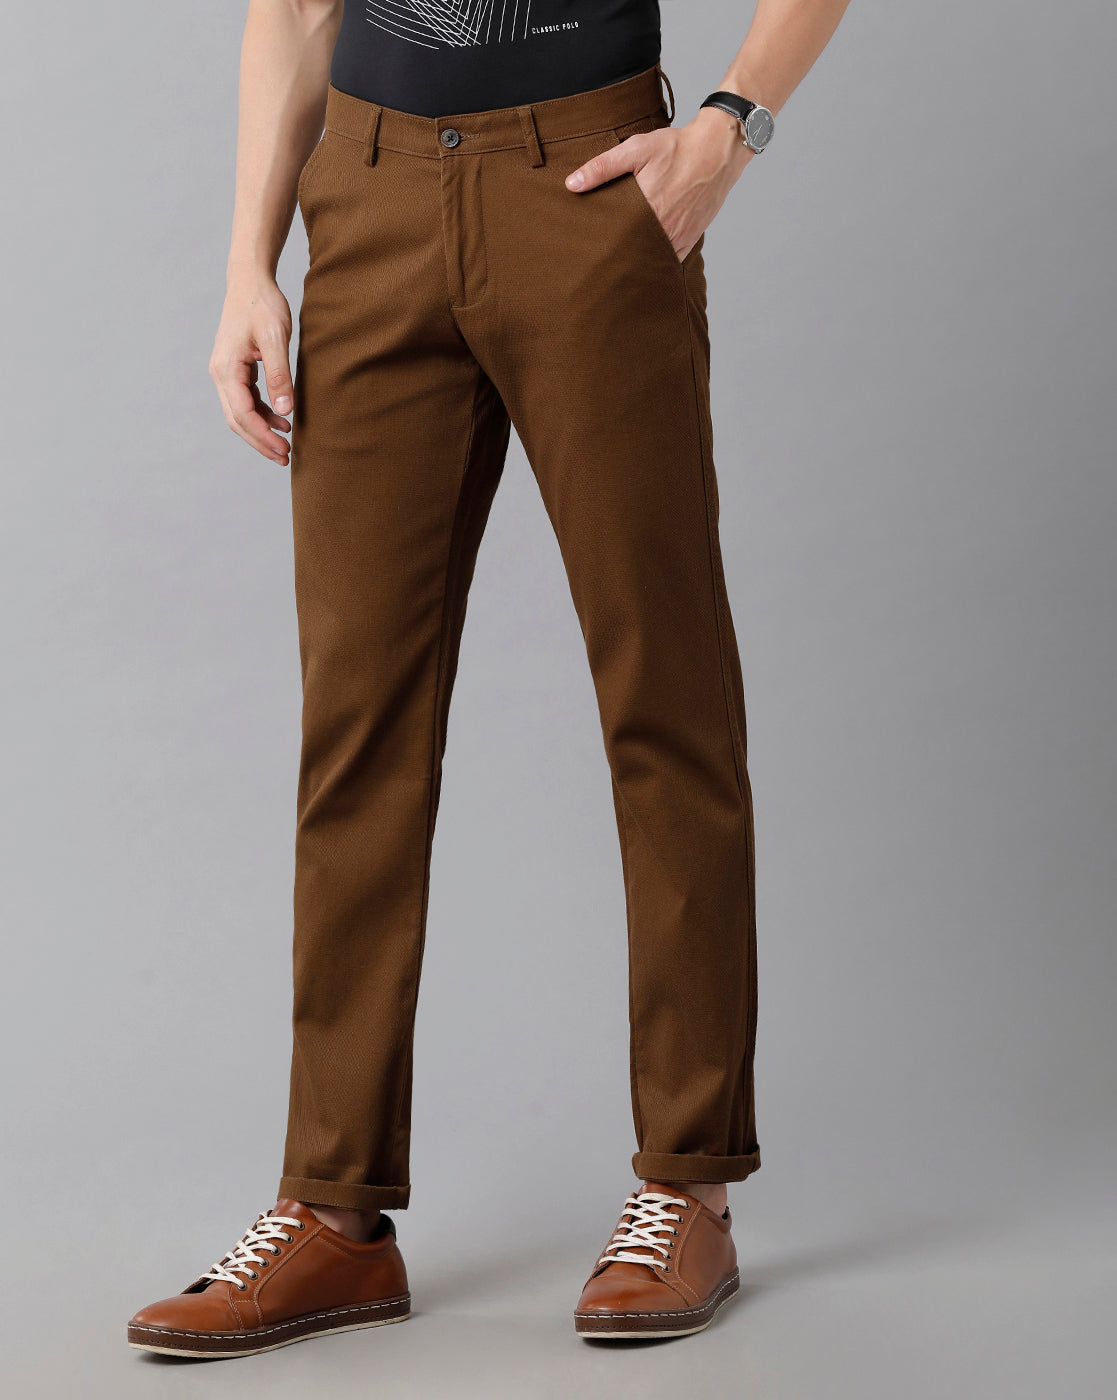 The Brown *faux* Leather Pants That make any outfit - Val en la Casa | Brown  leather pants, Brown outfit, Leather pants outfit